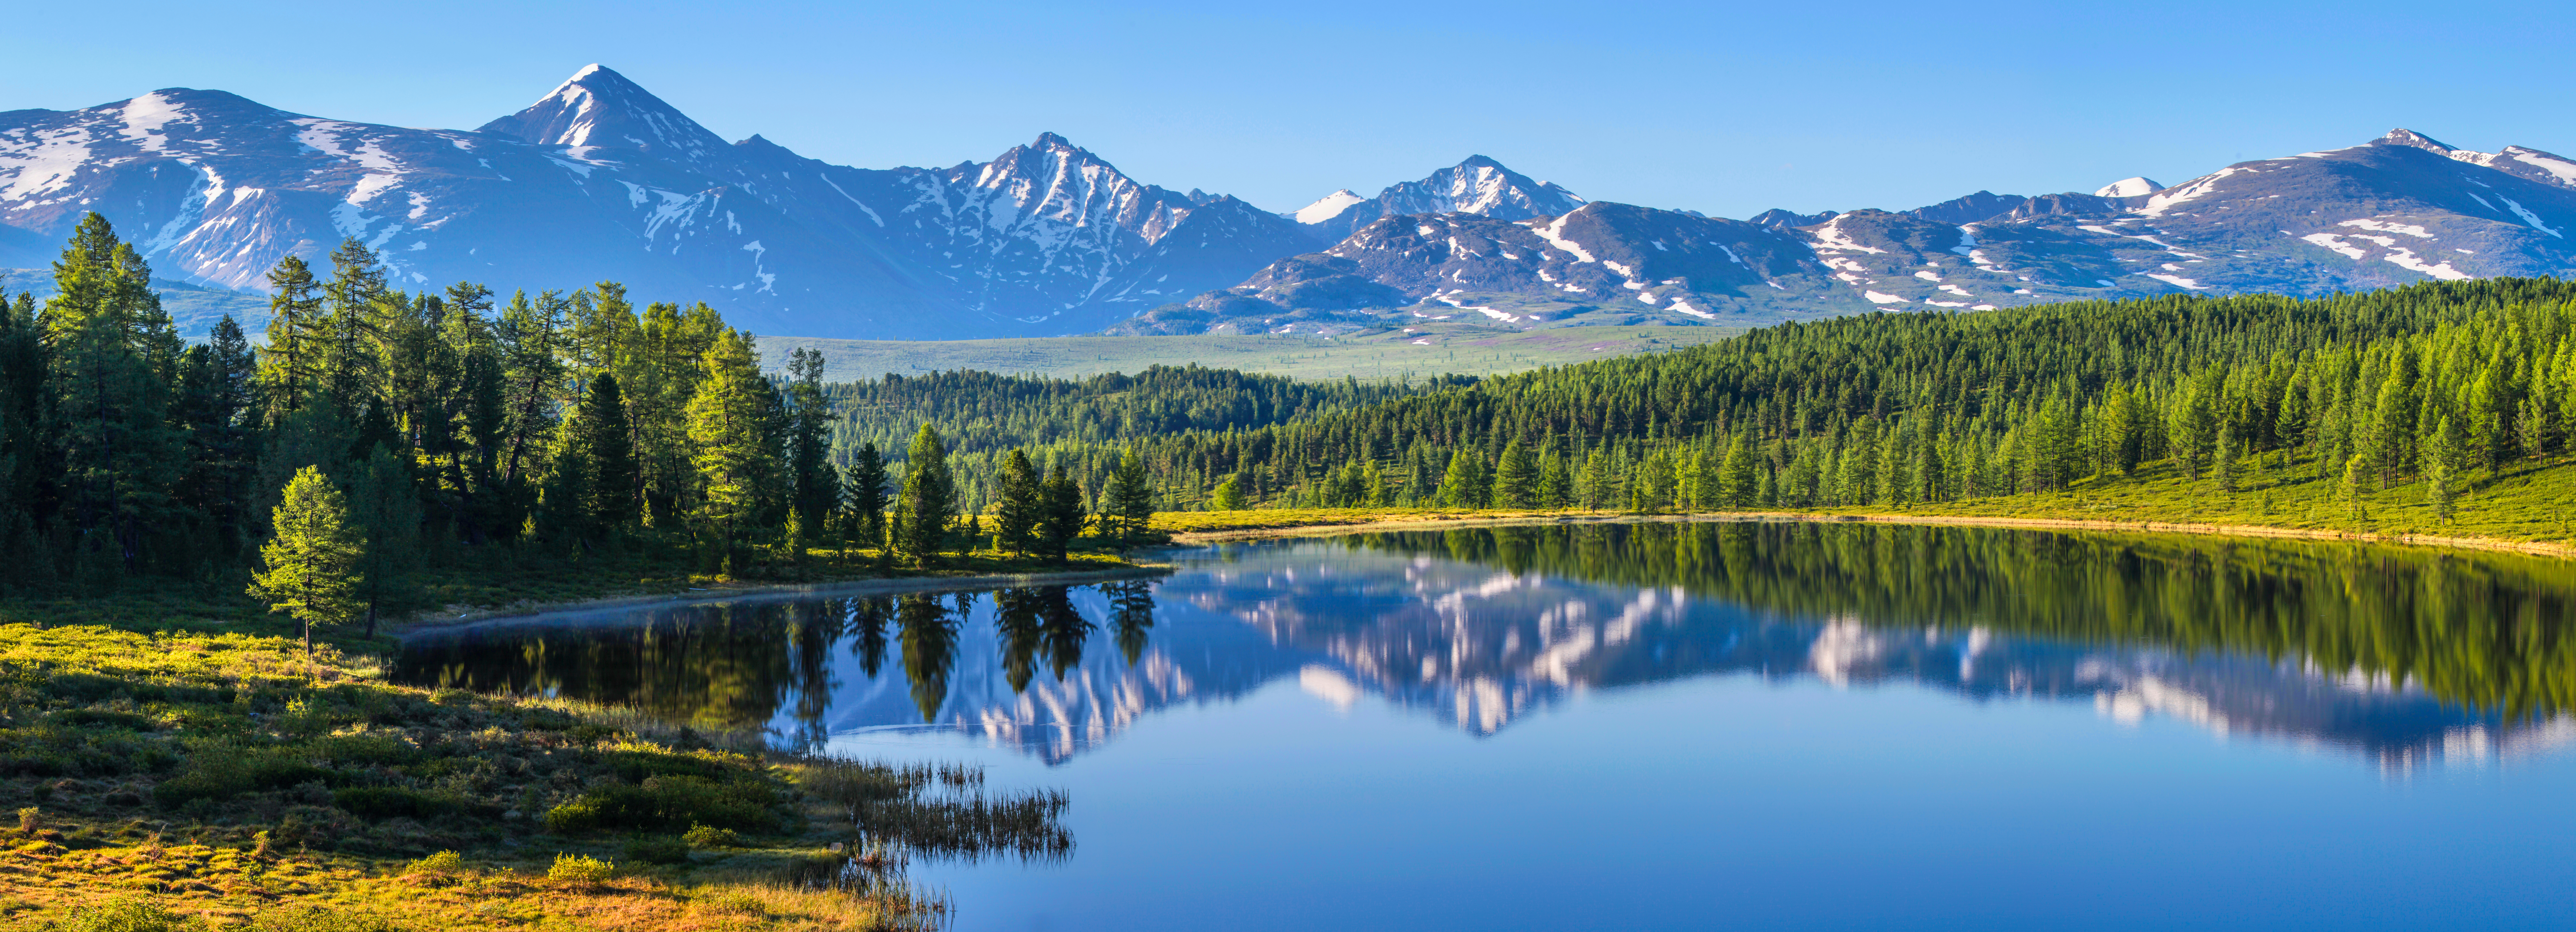 Mountain,Landscape,,Picturesque,Mountain,Lake,In,The,Summer,Morning,,Large